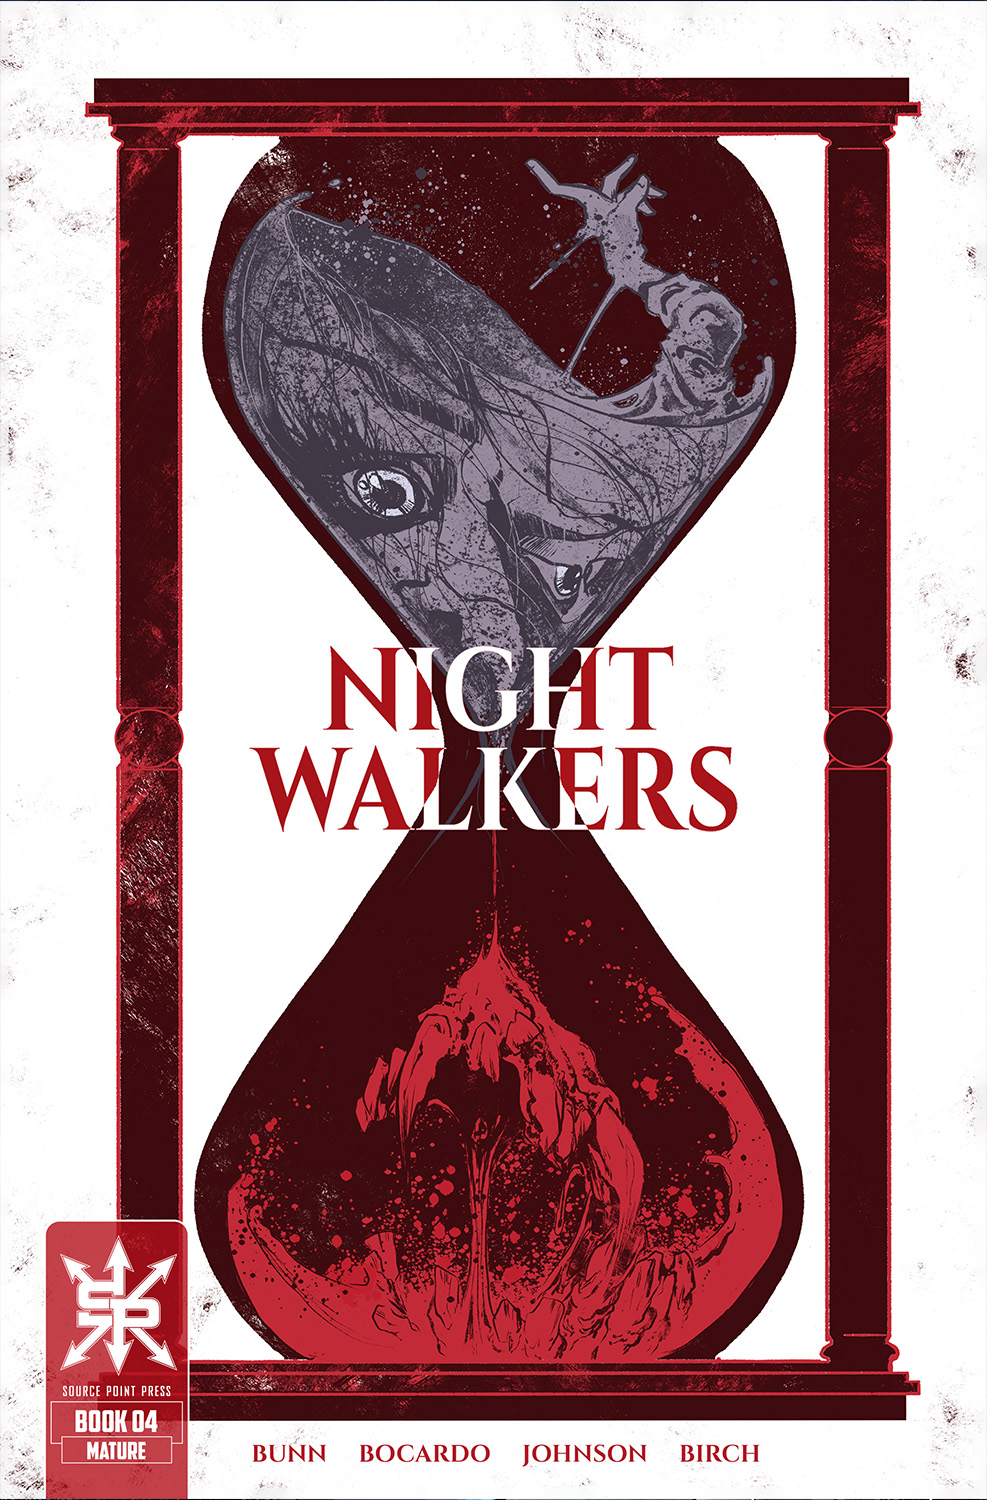 Nightwalkers #4 Cover A Bocardo (Mature) (Of 5)